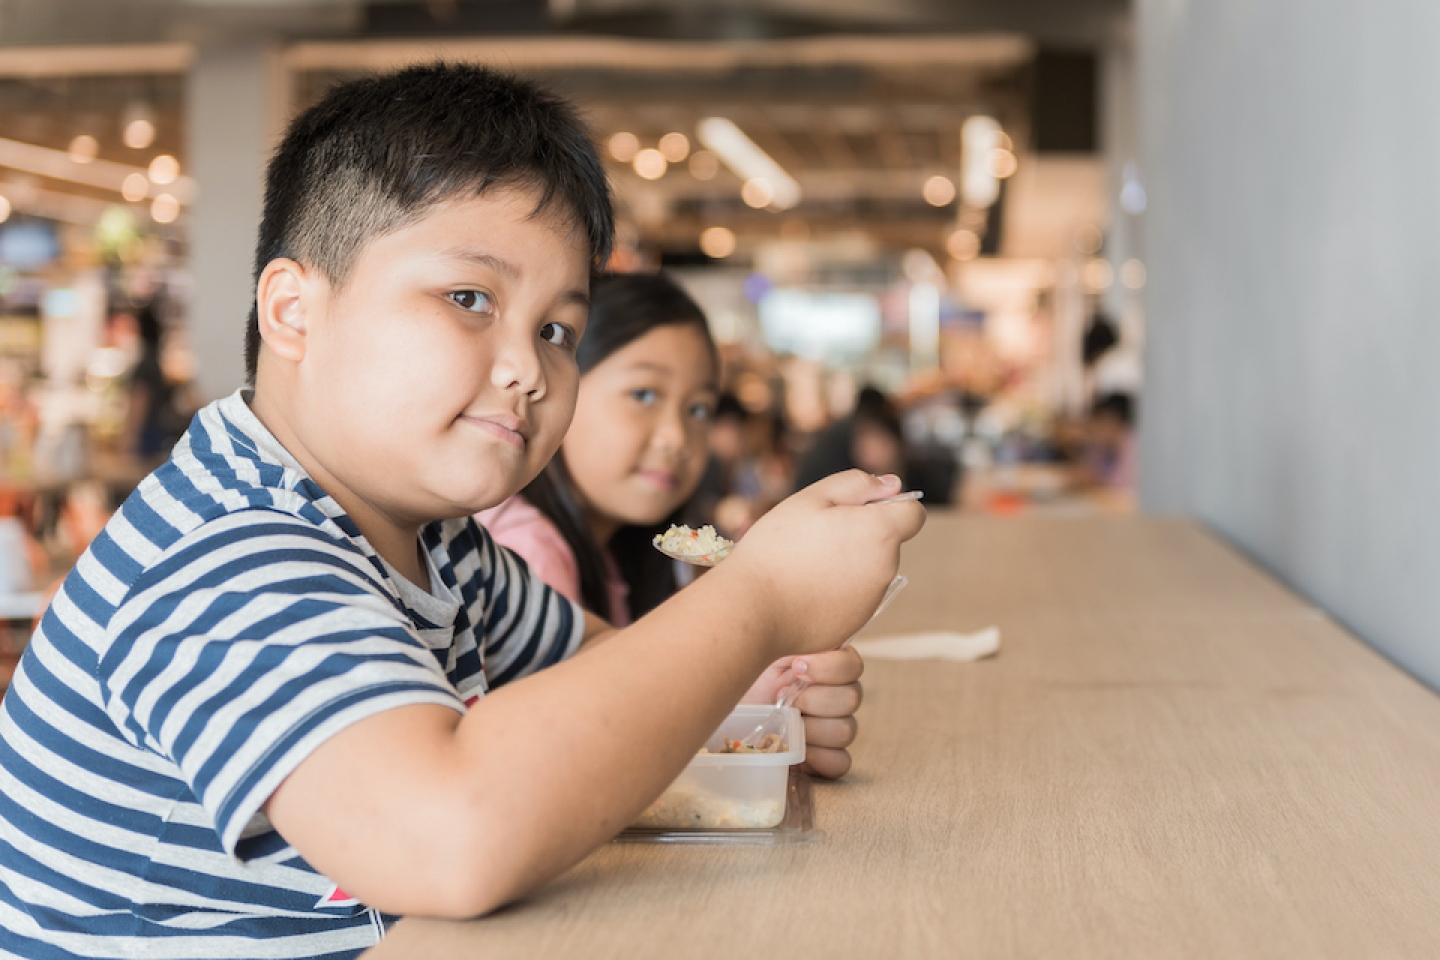 obese child eating at food court